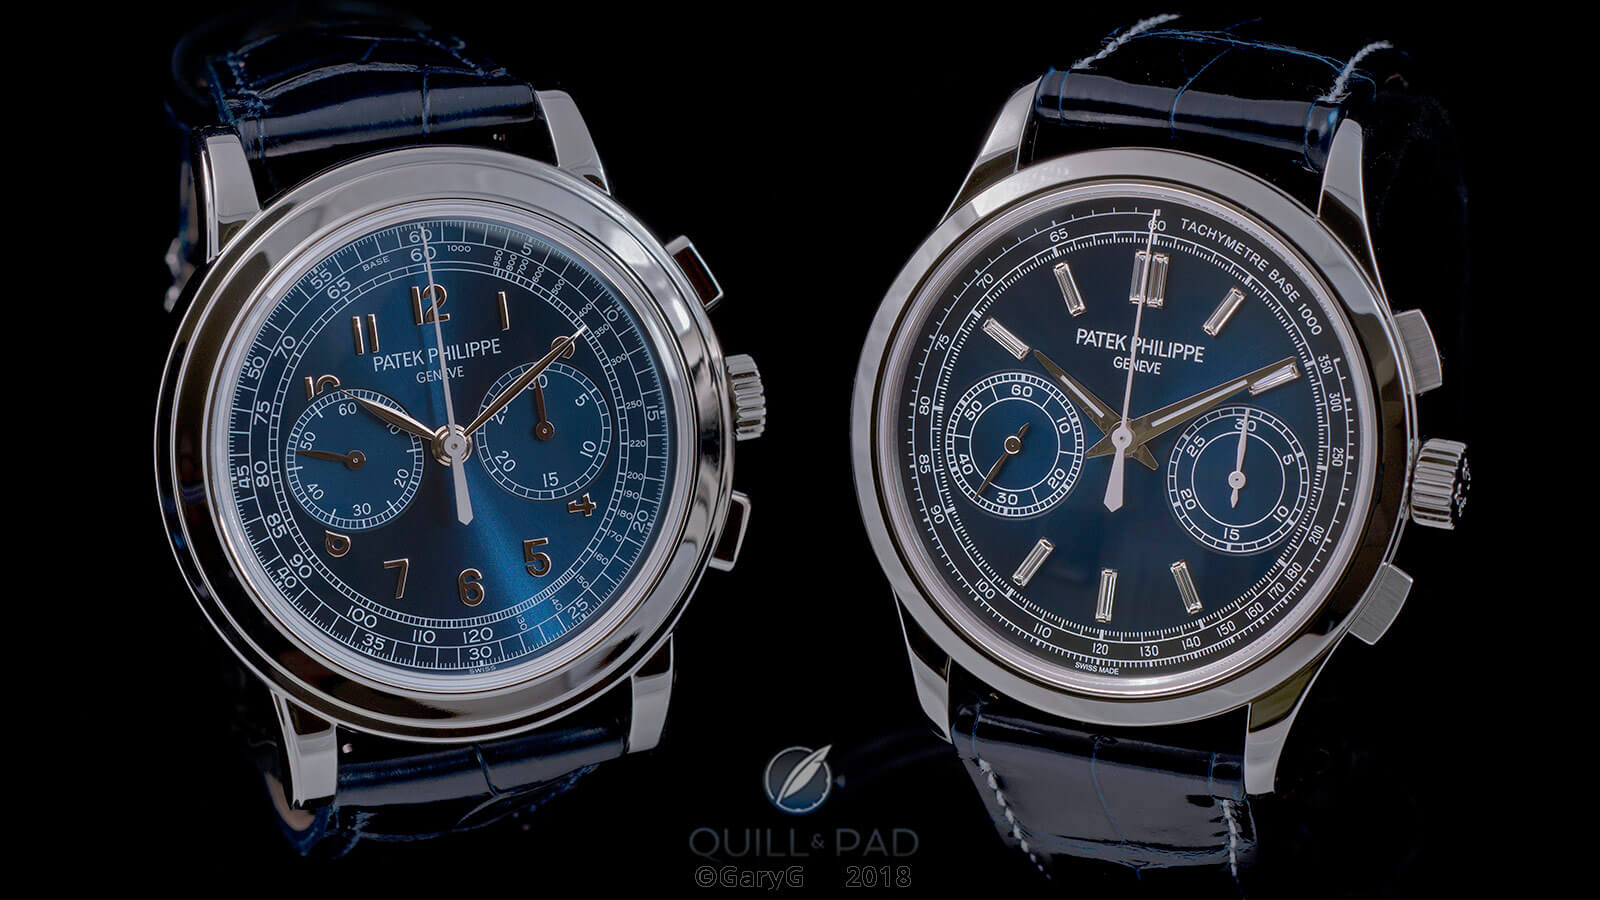 Big hitters: Patek Philippe Reference 5070P-013 (at left) and Reference 5170P